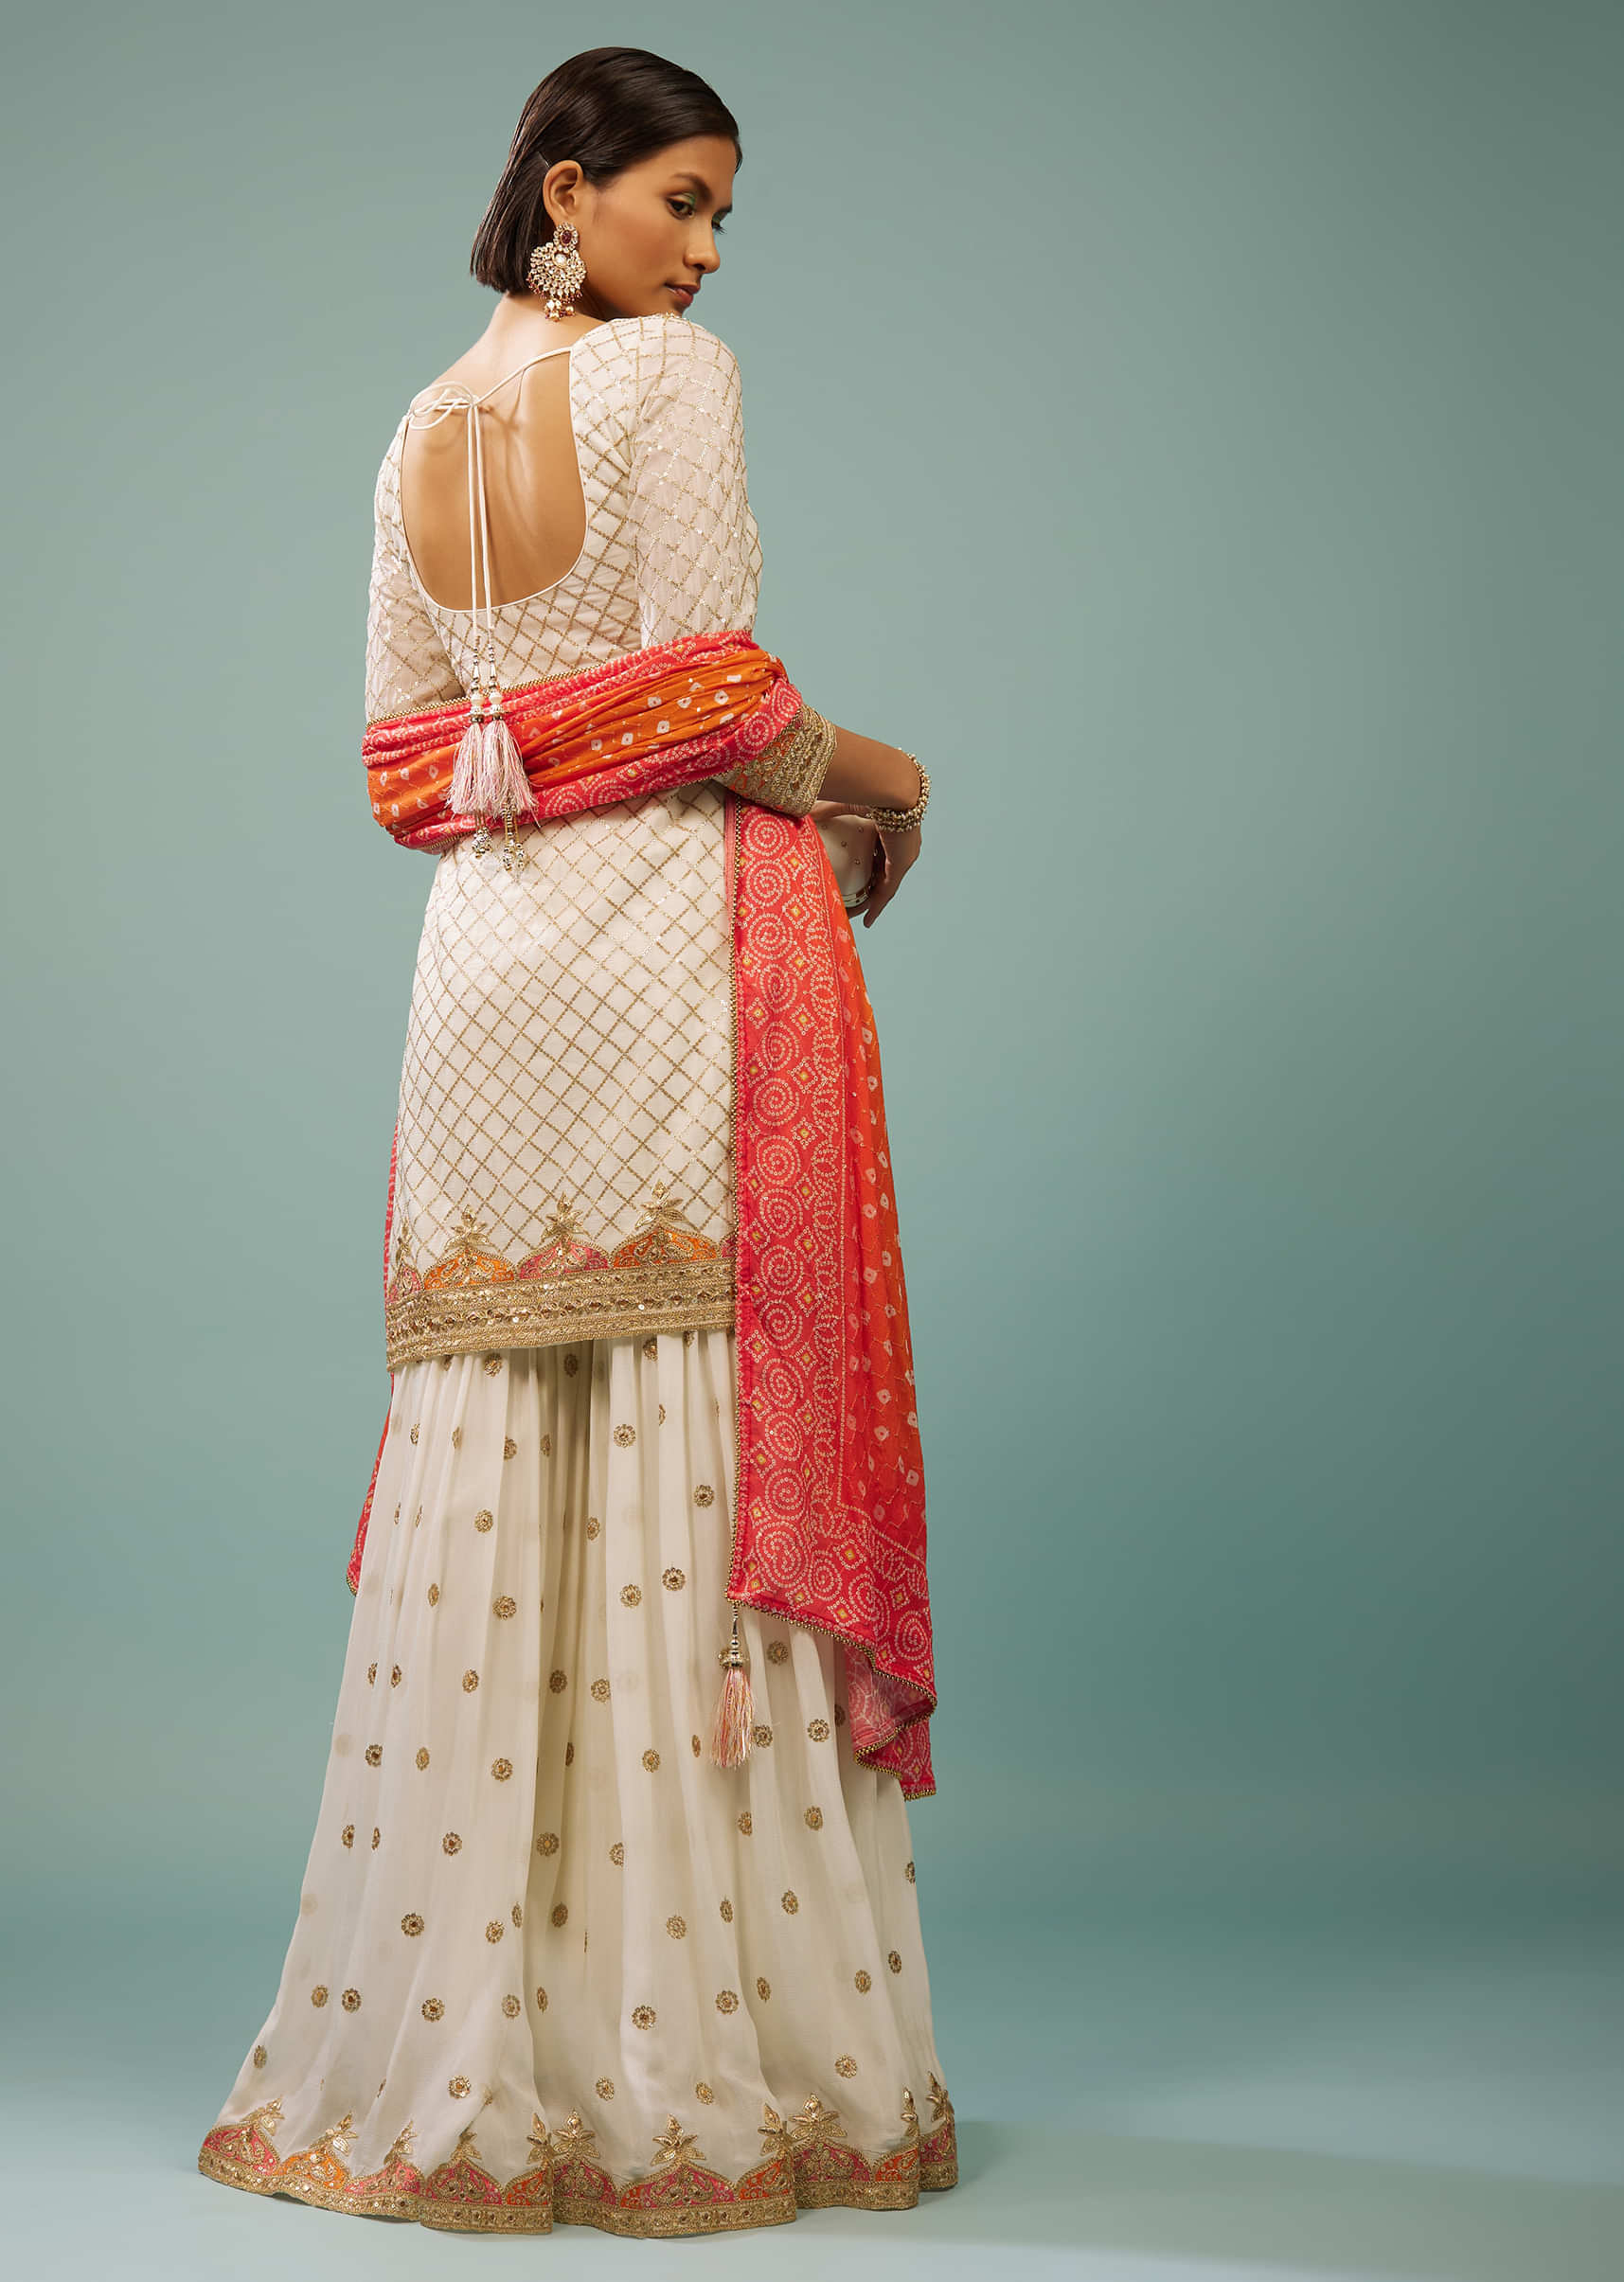 Daisy White Sharara Suit With Embroidery And Bandhani Dupatta